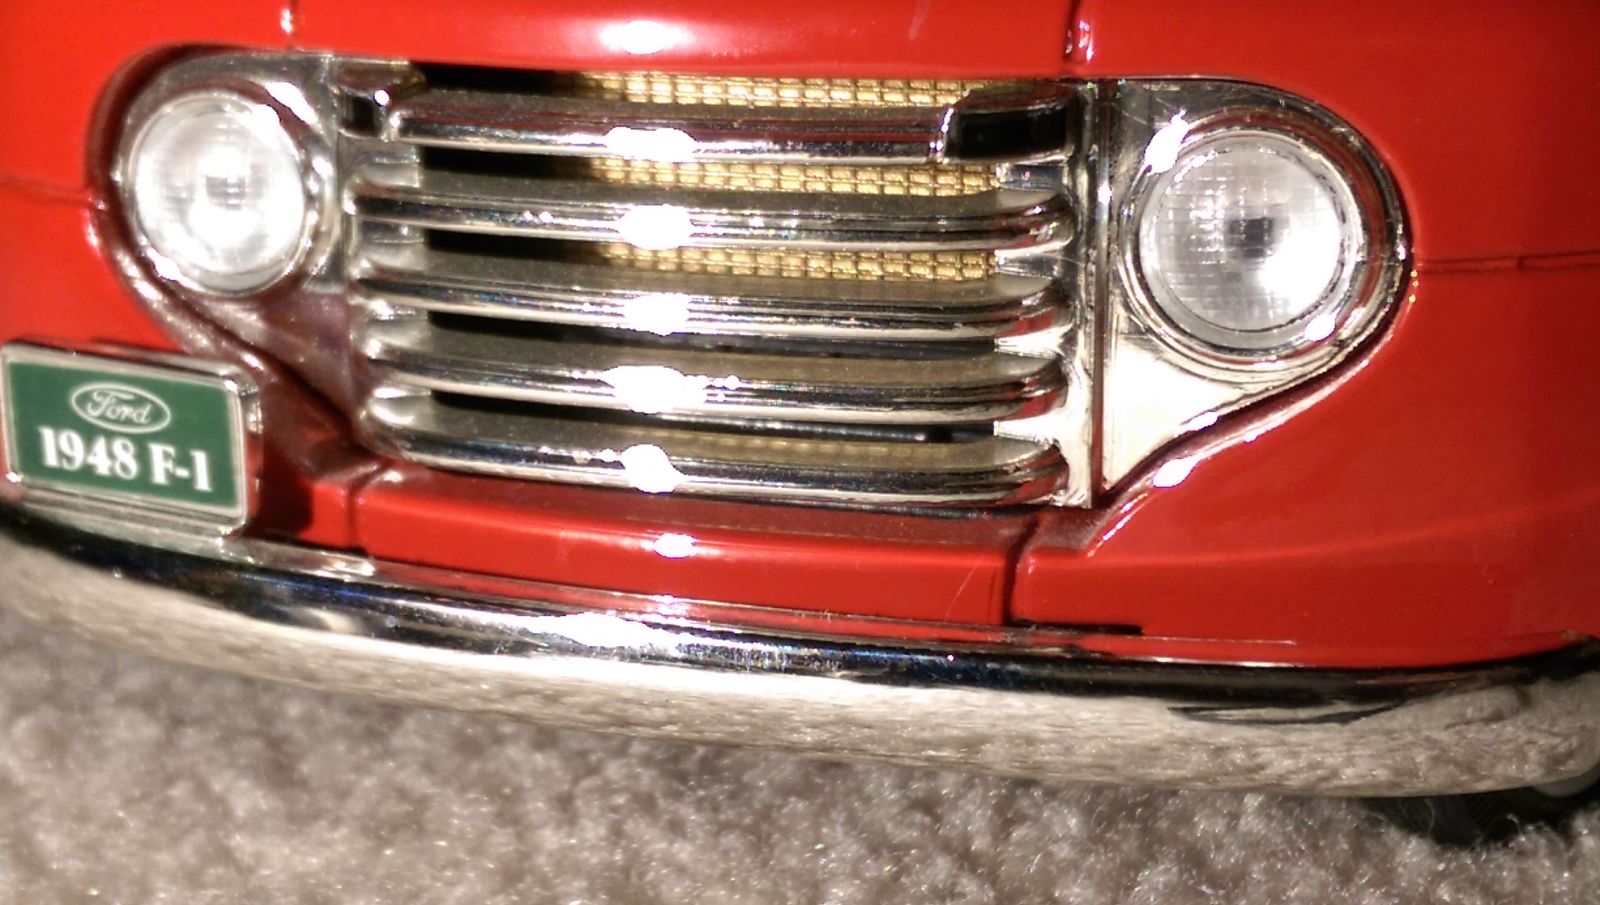 The grille isn’t a solid piece and you can see the brass radiator through the grille. 